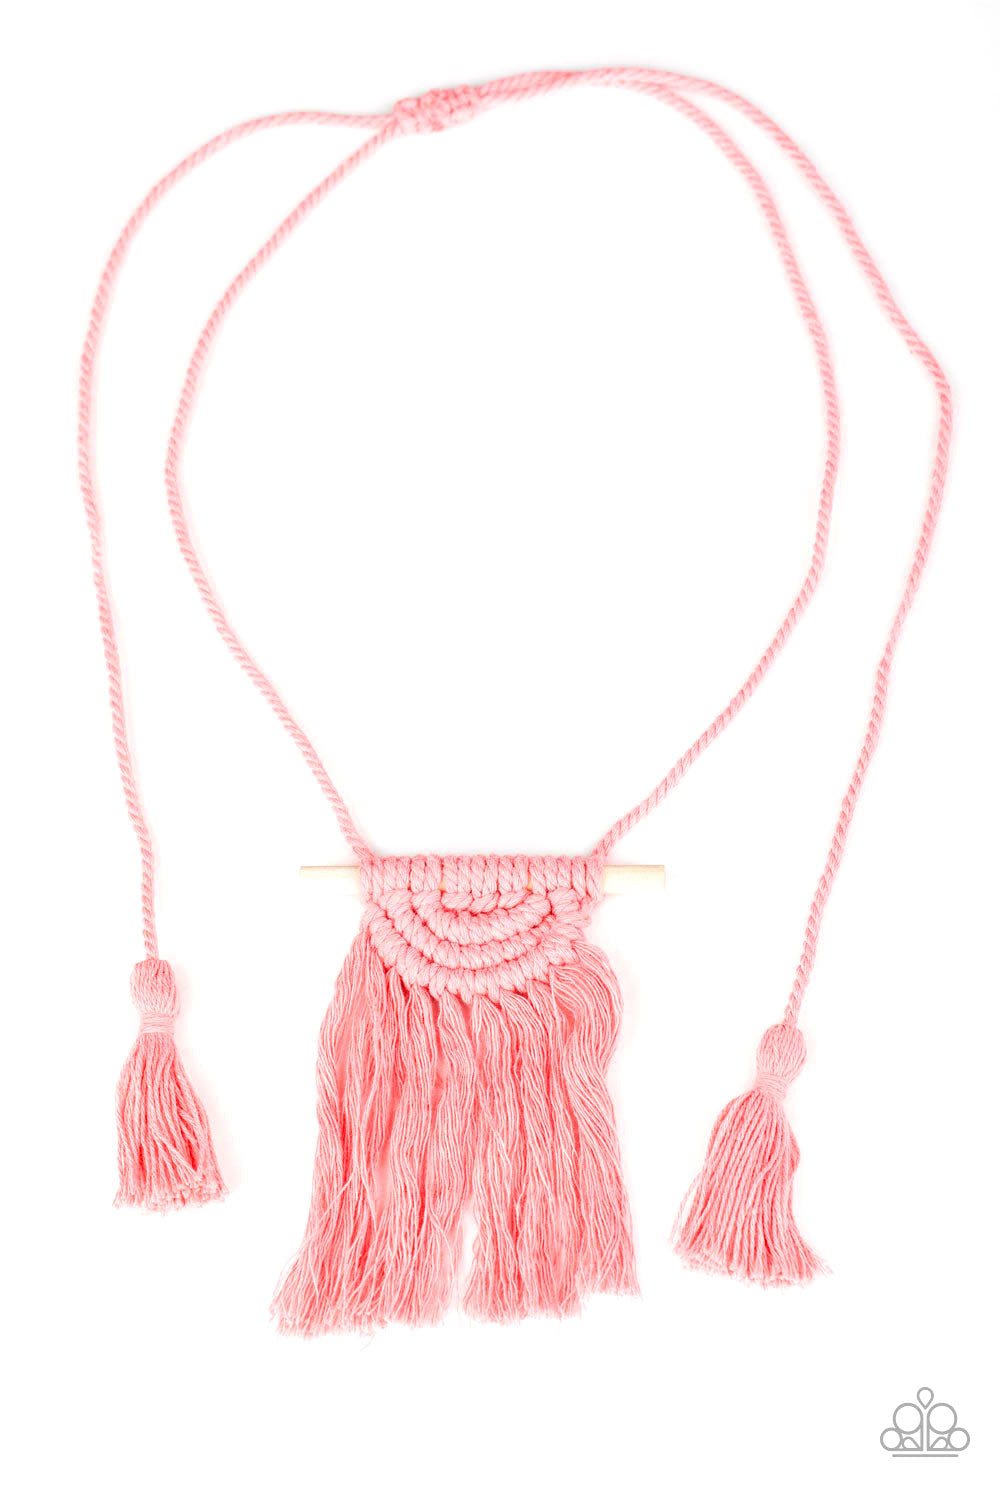 Between You and MACRAME-Pink Necklace